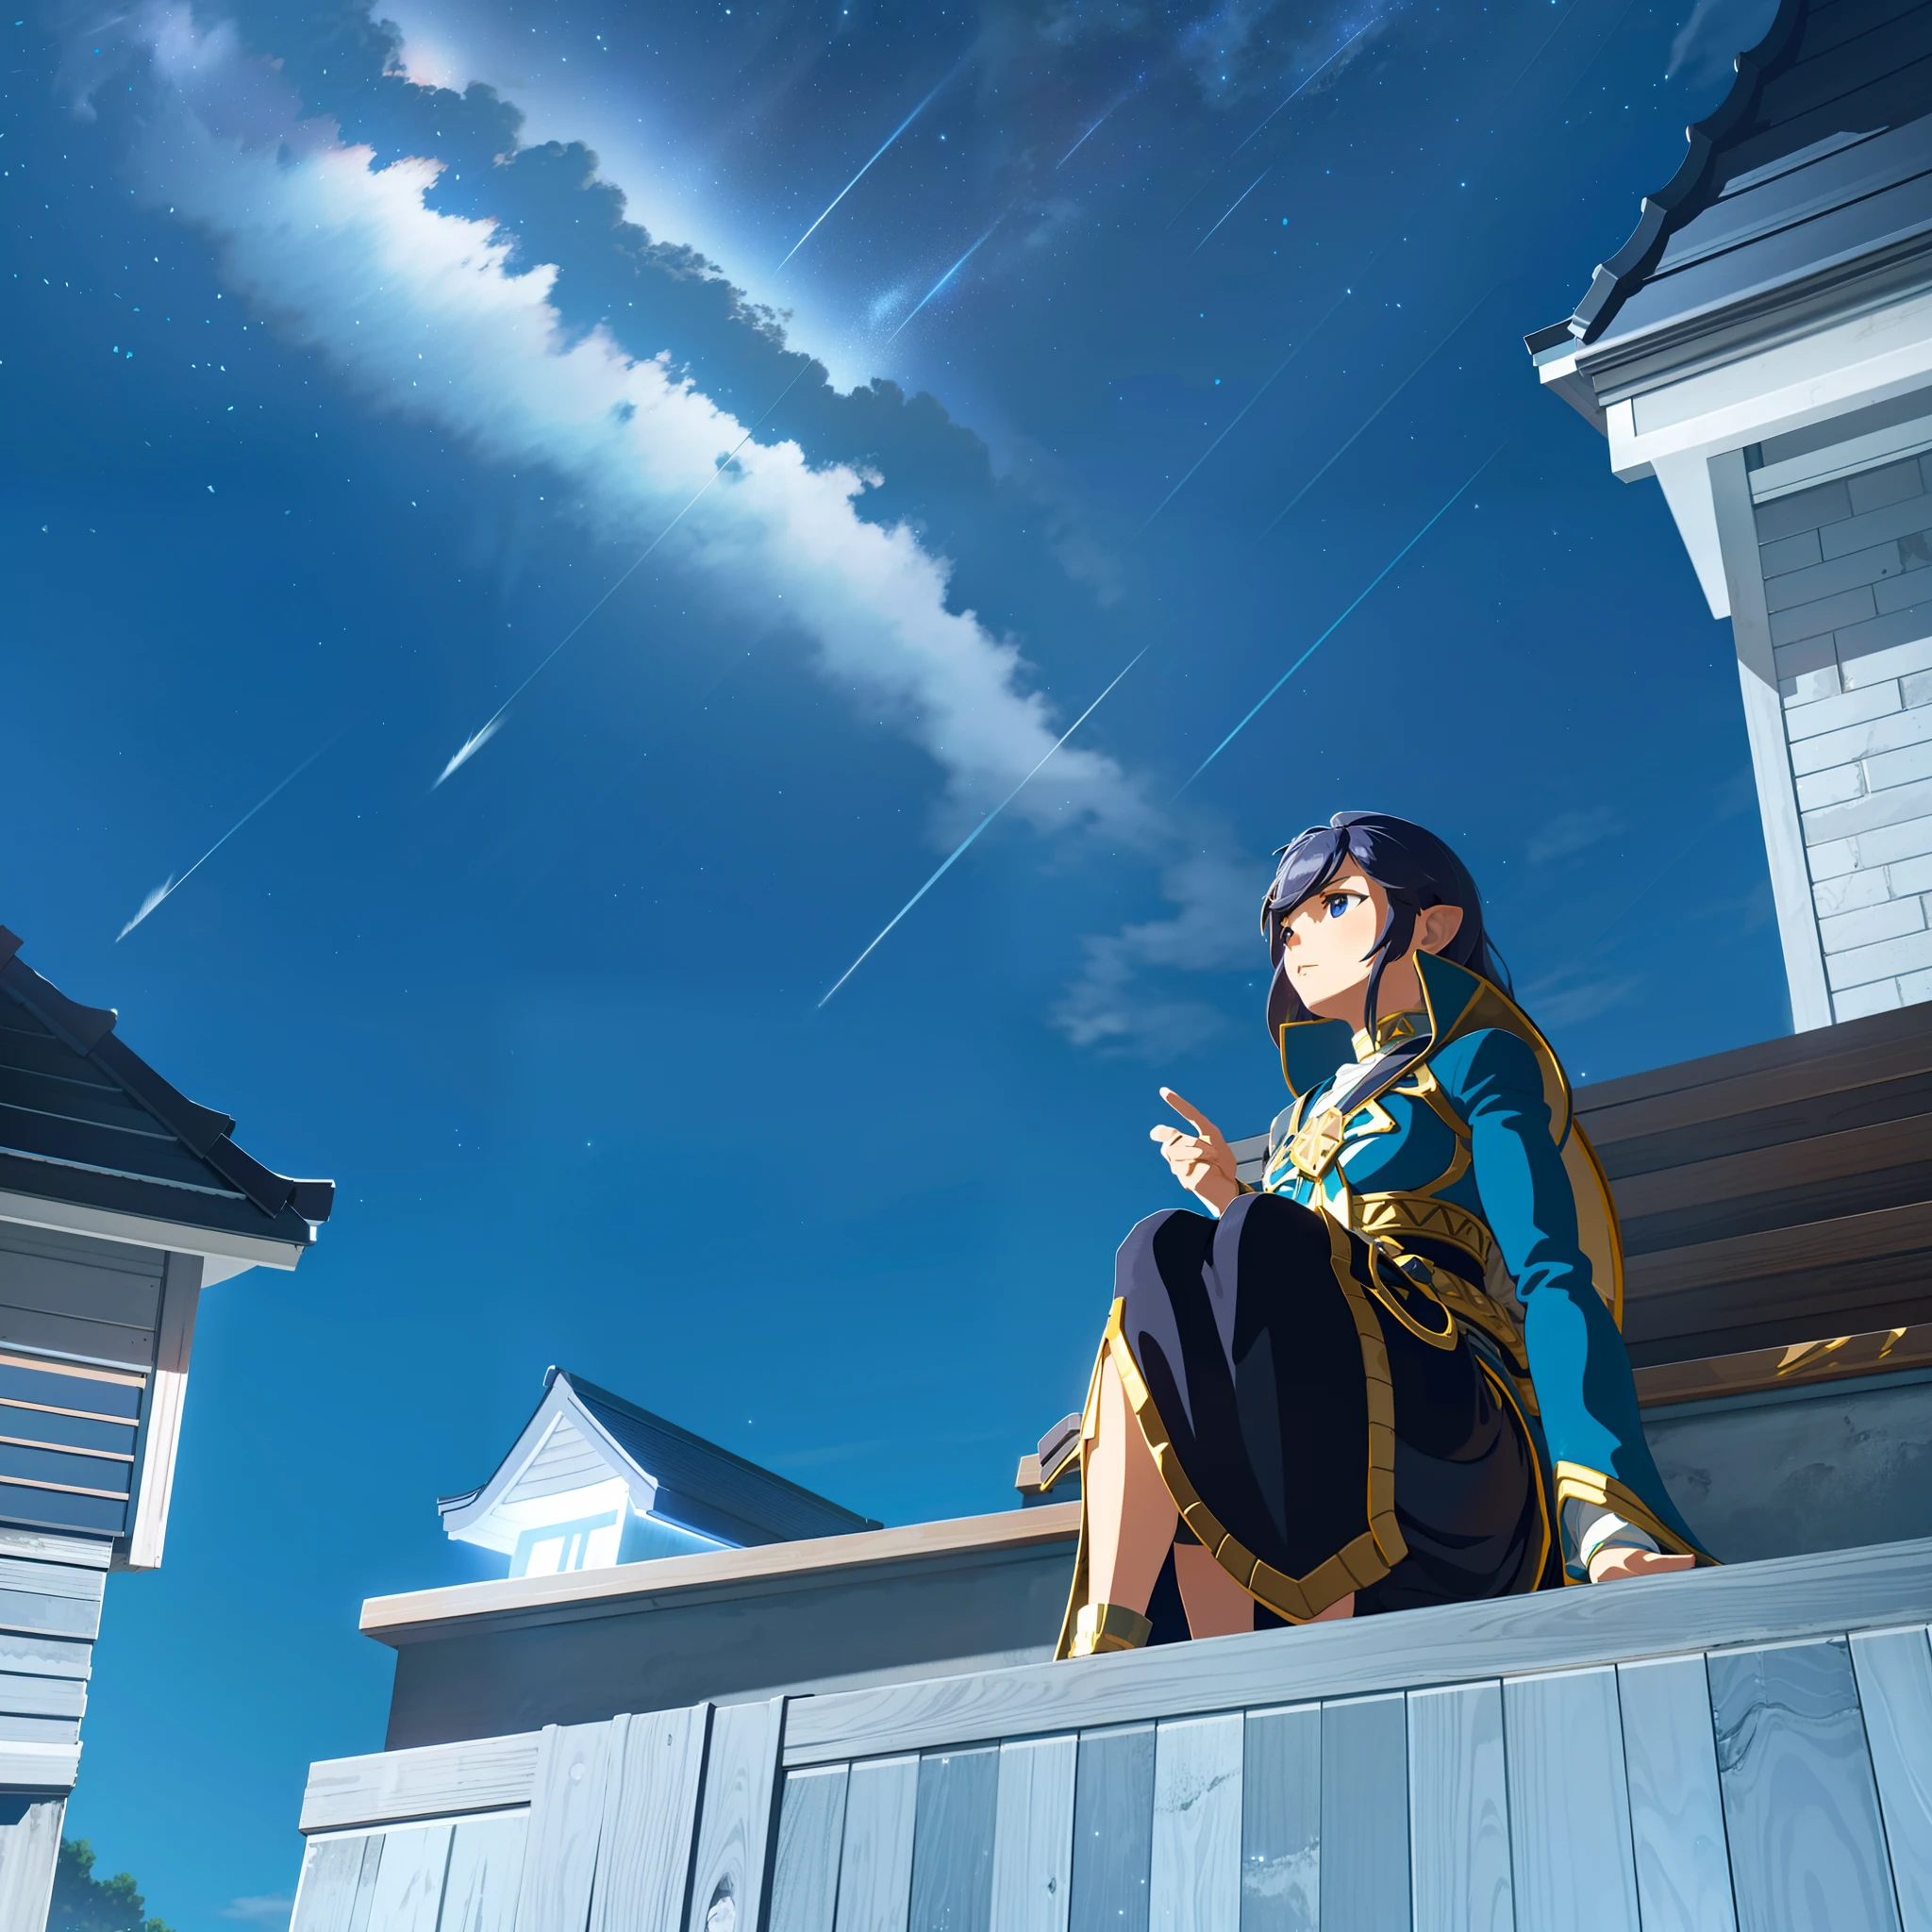 the night，A girl sits on the roof of a house and looks up at the sky，A sky full of stars，A shining shooting star crossed the sky， in a panoramic view， scenecy， horizon， the roof， sitting on rooftop， ventania，8K